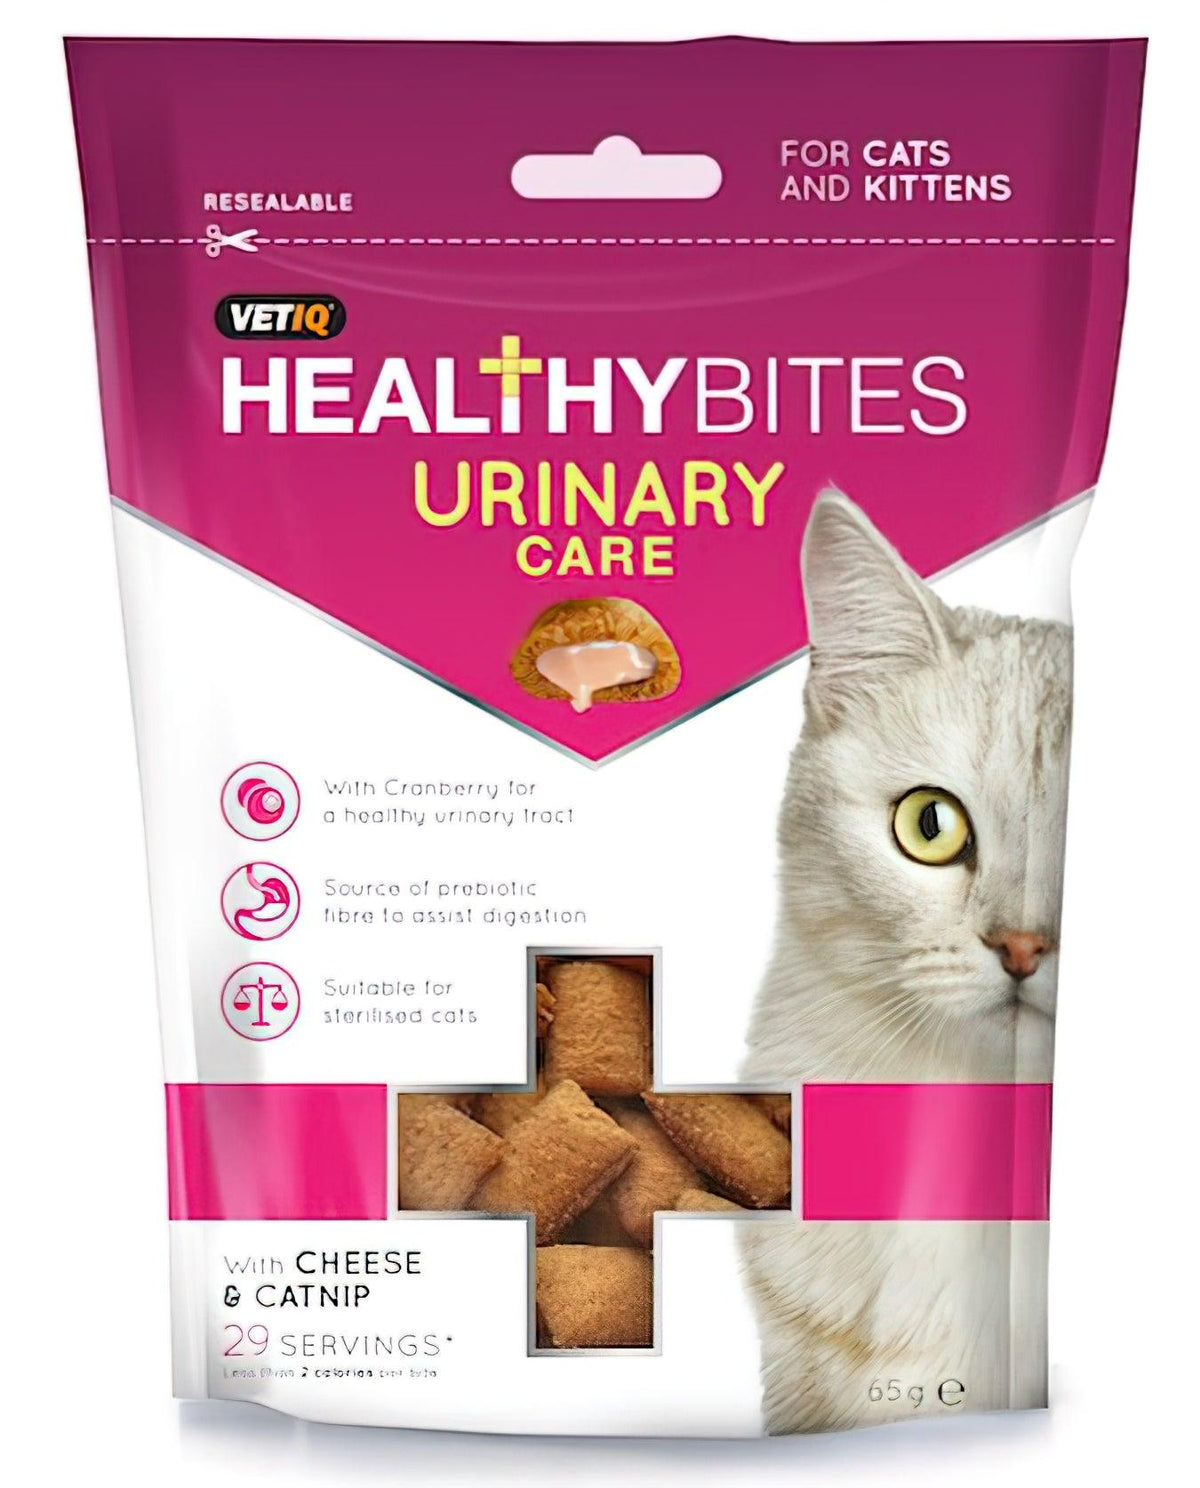 Healthy Bites Urinary Care For Cats & Kittens - PAWS CLUB